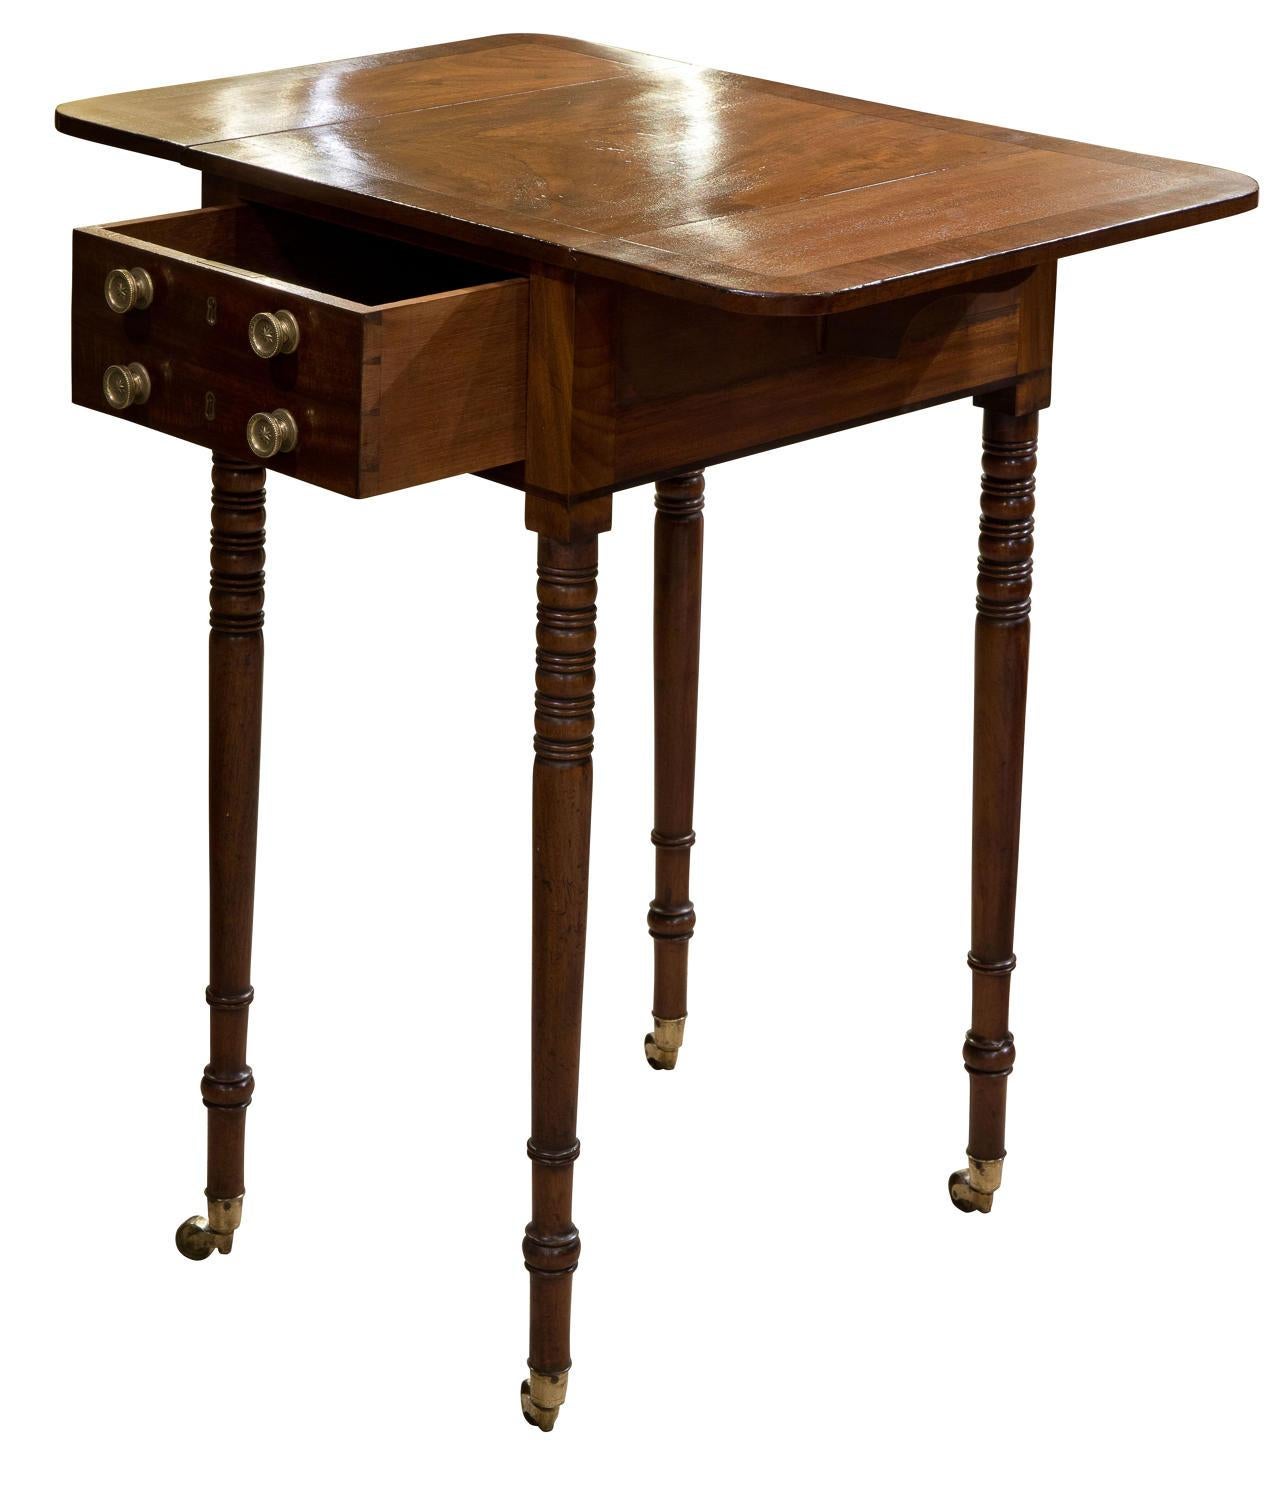 A fine mahogany worktable with cross banded dropleaf top and single drawer under. Standing on fine turned legs with brass castors

Depth with leaves down 35cm

c1810